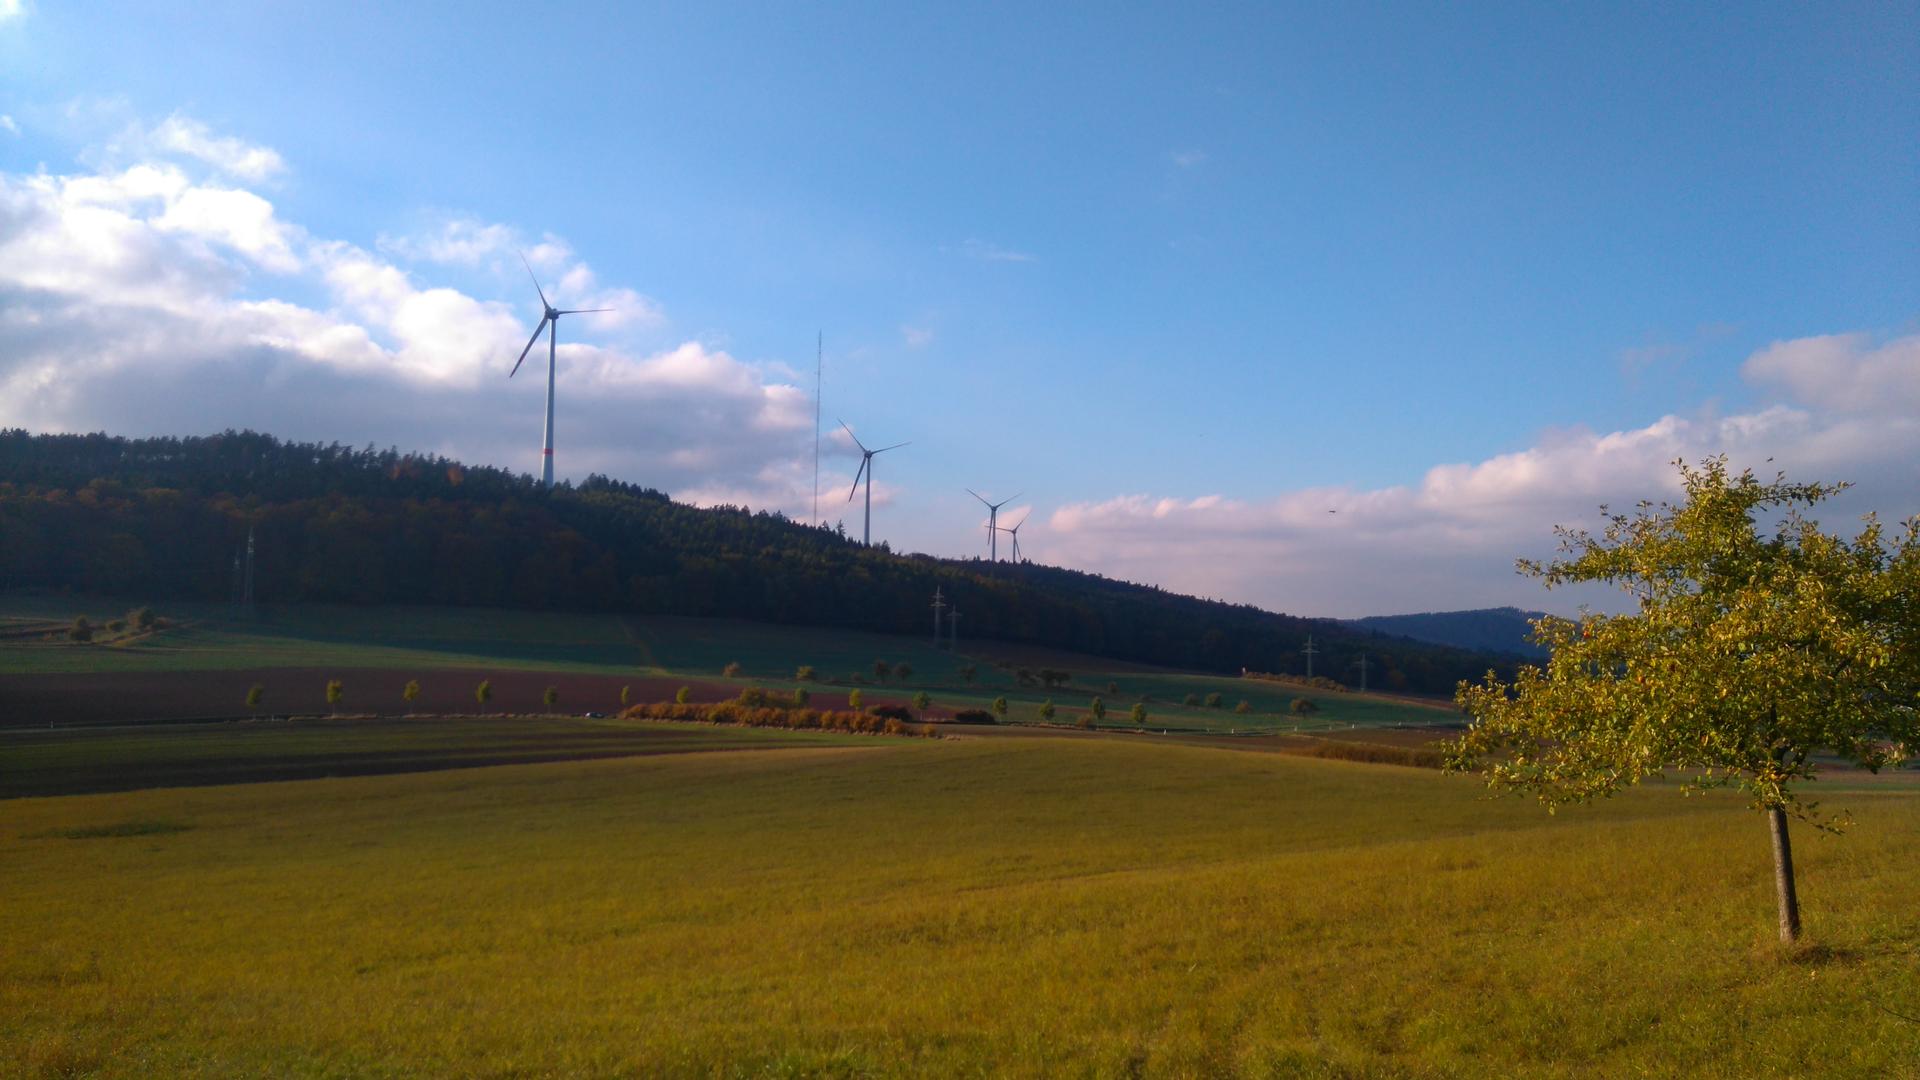 Wolfhagen boasts four windmills, a 42,000-panel solar farm and two biogas facilities that turn waste into energy.